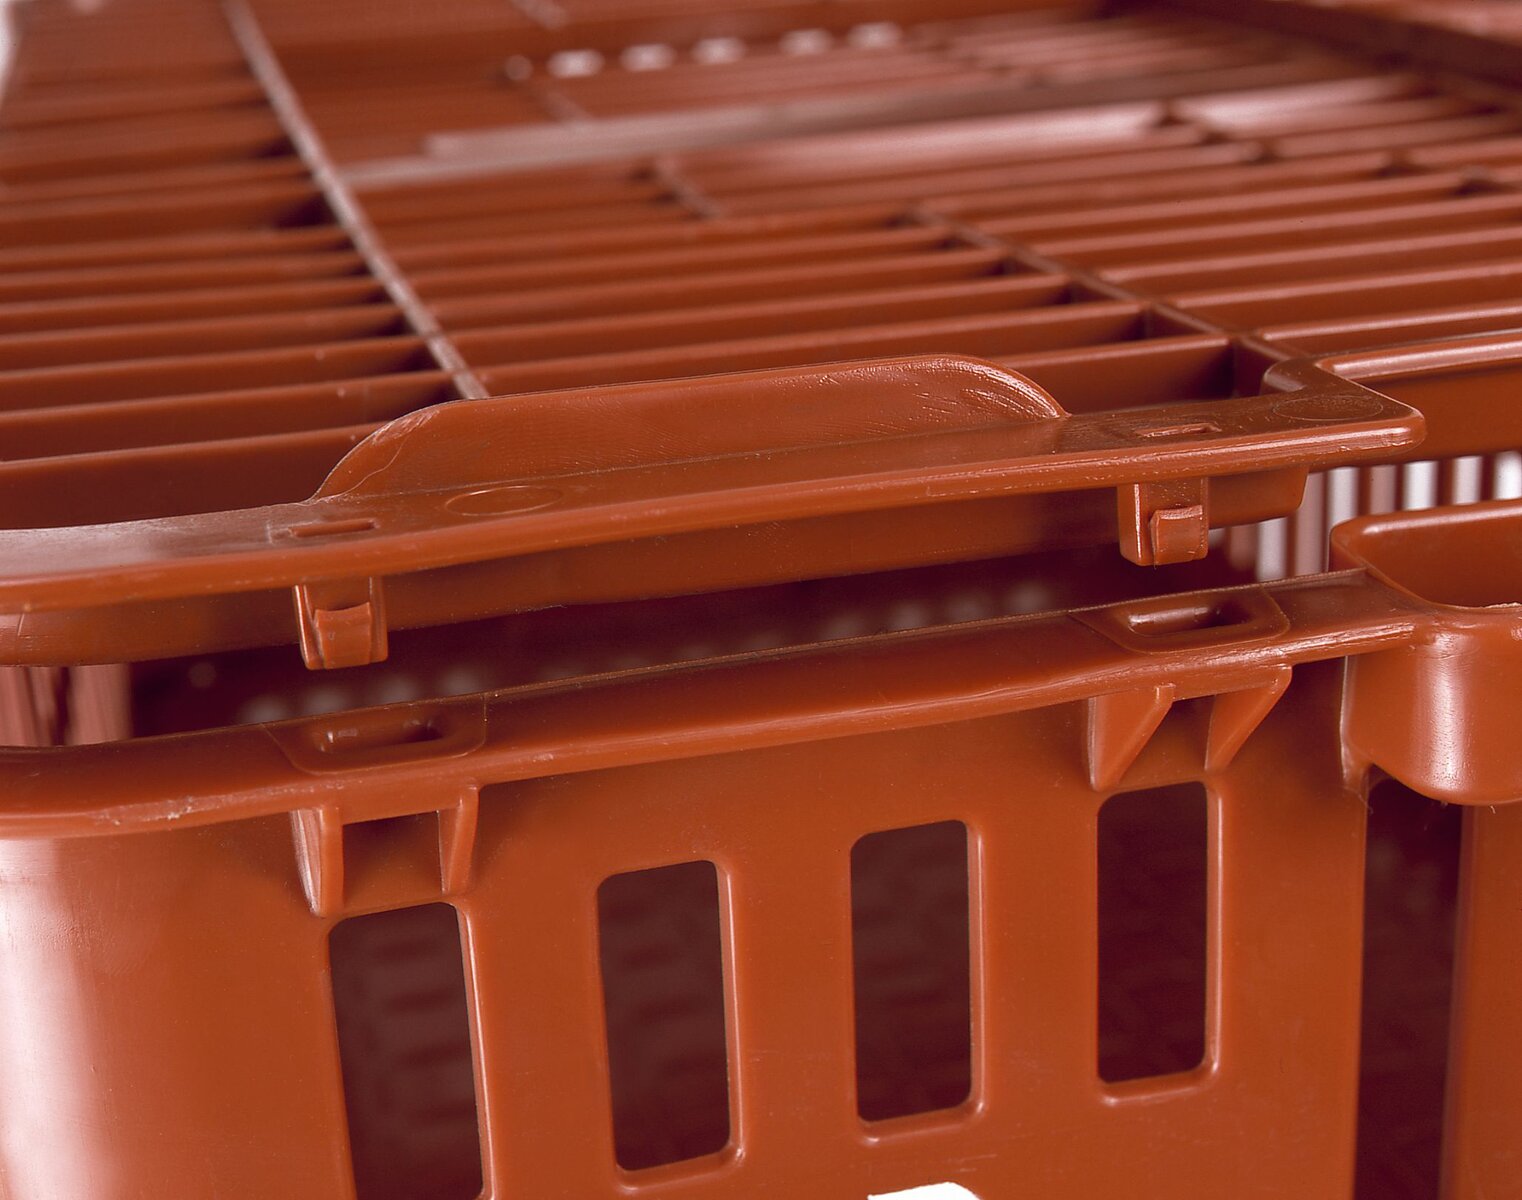 Poultry transport crate detail